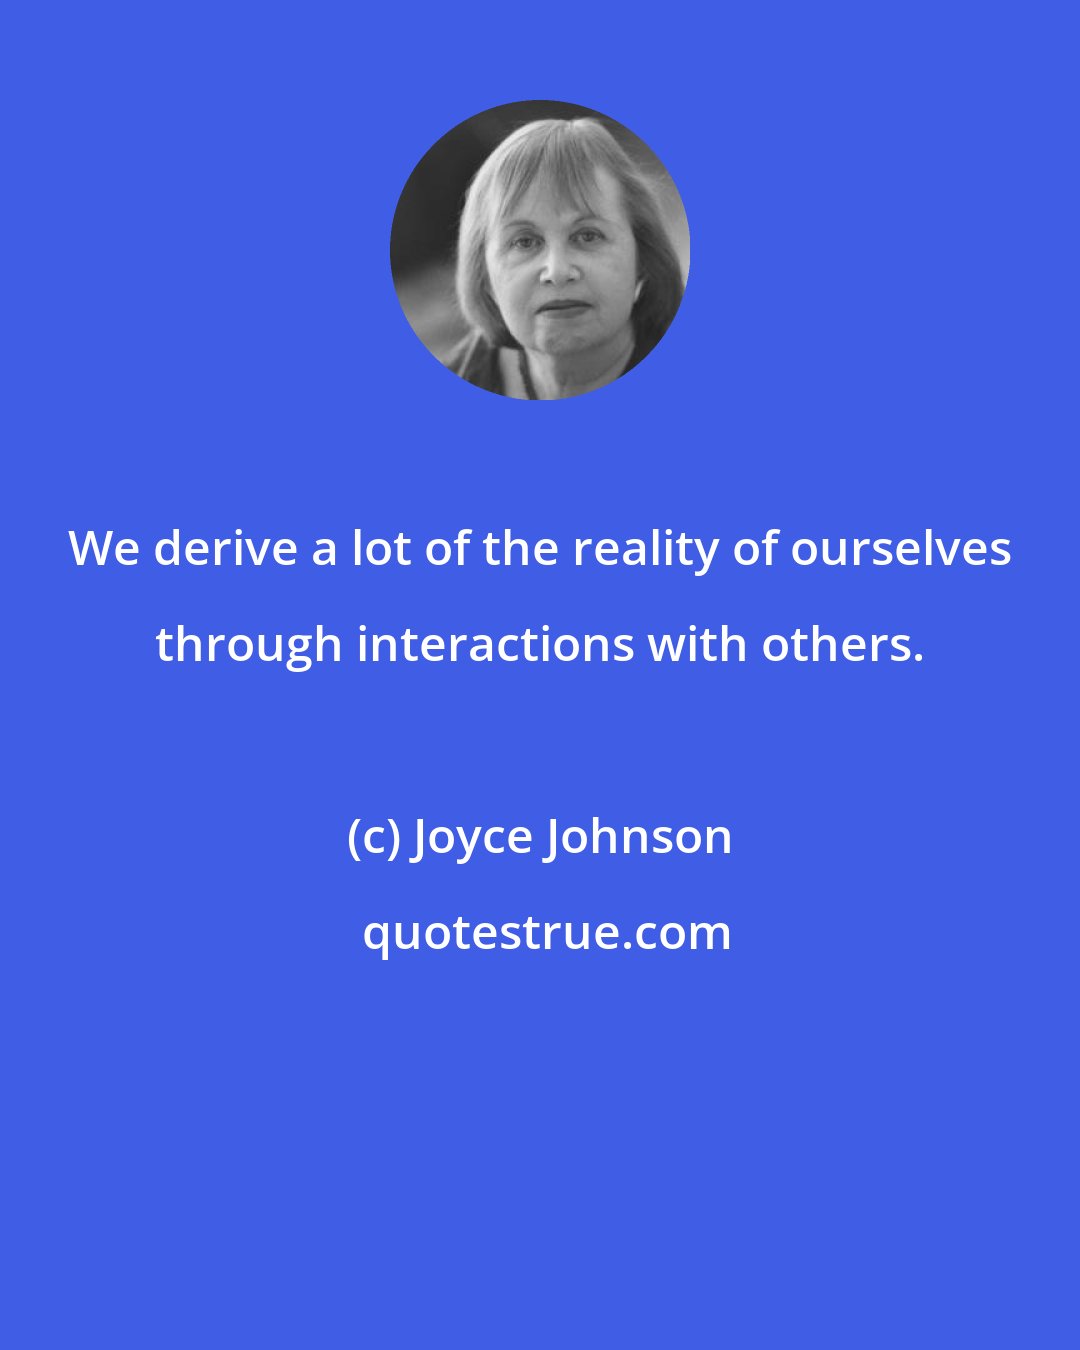 Joyce Johnson: We derive a lot of the reality of ourselves through interactions with others.